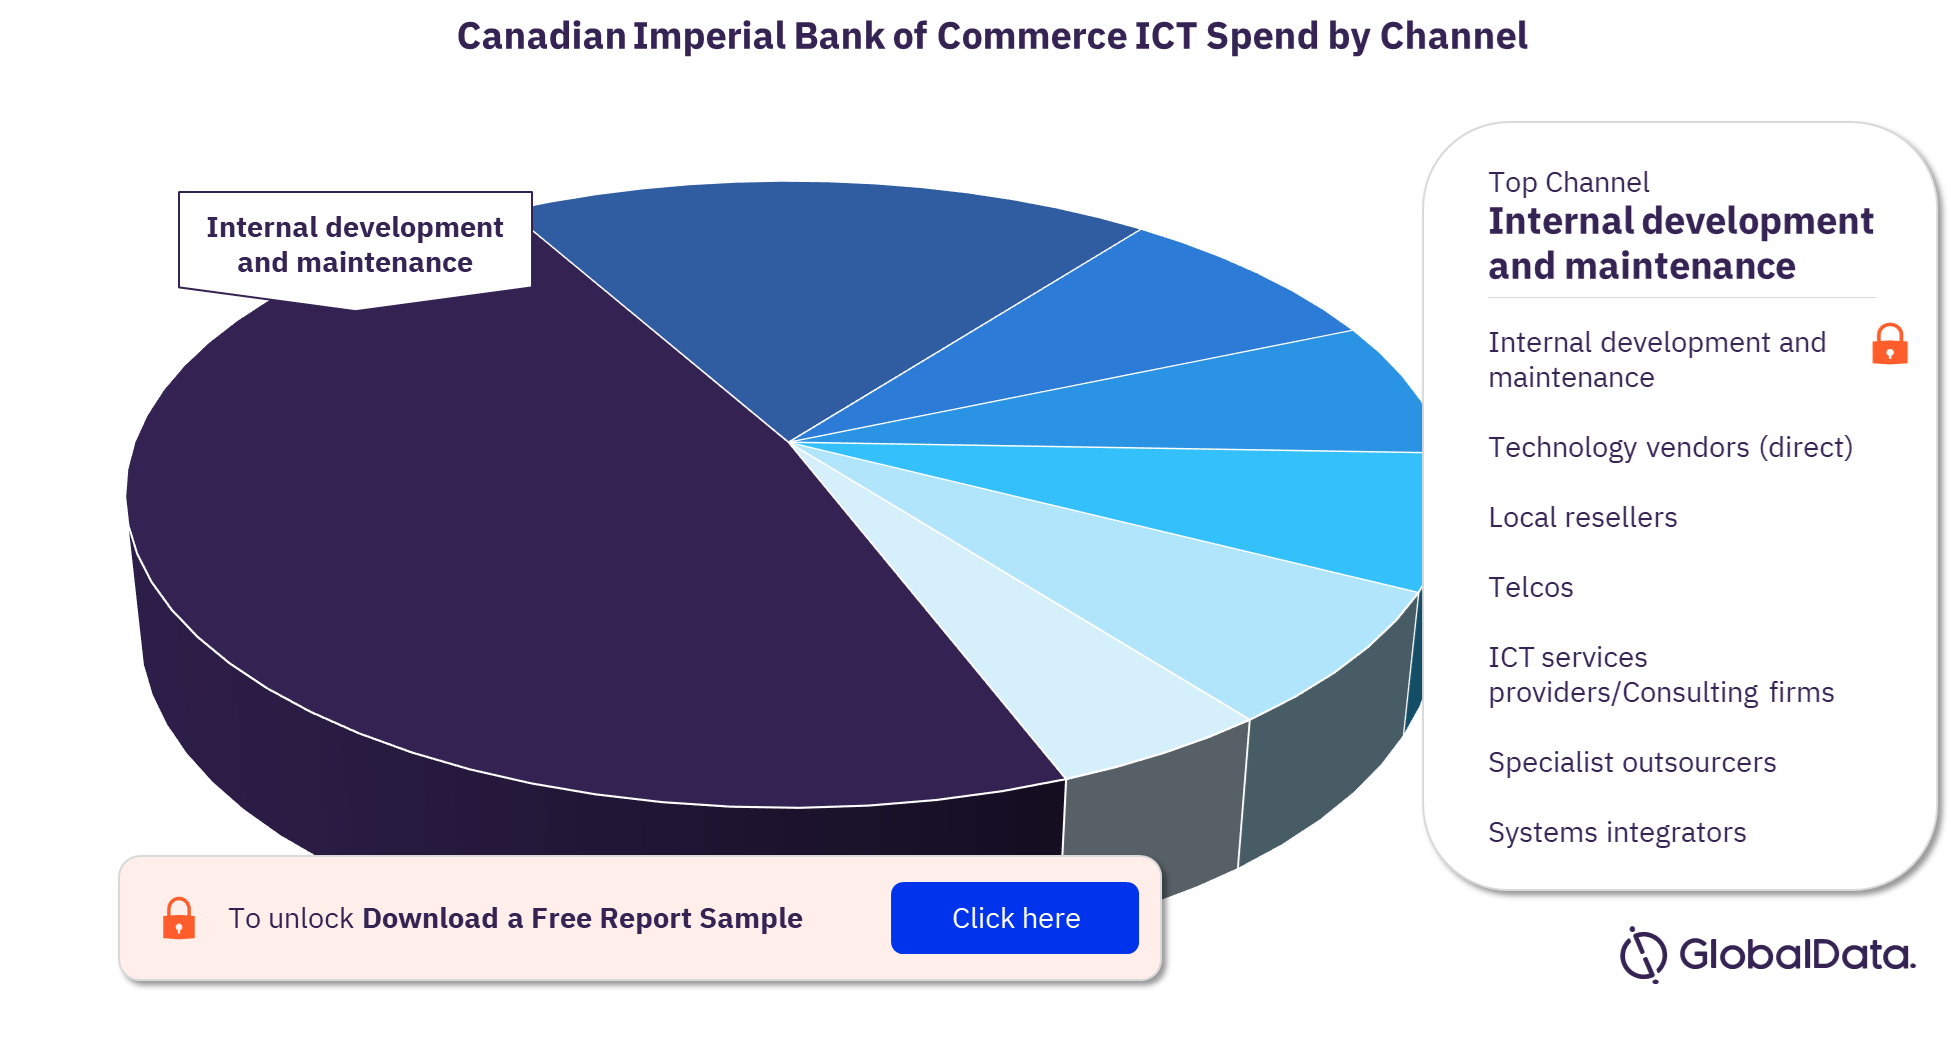 CIBC ICT Spend by Channel 